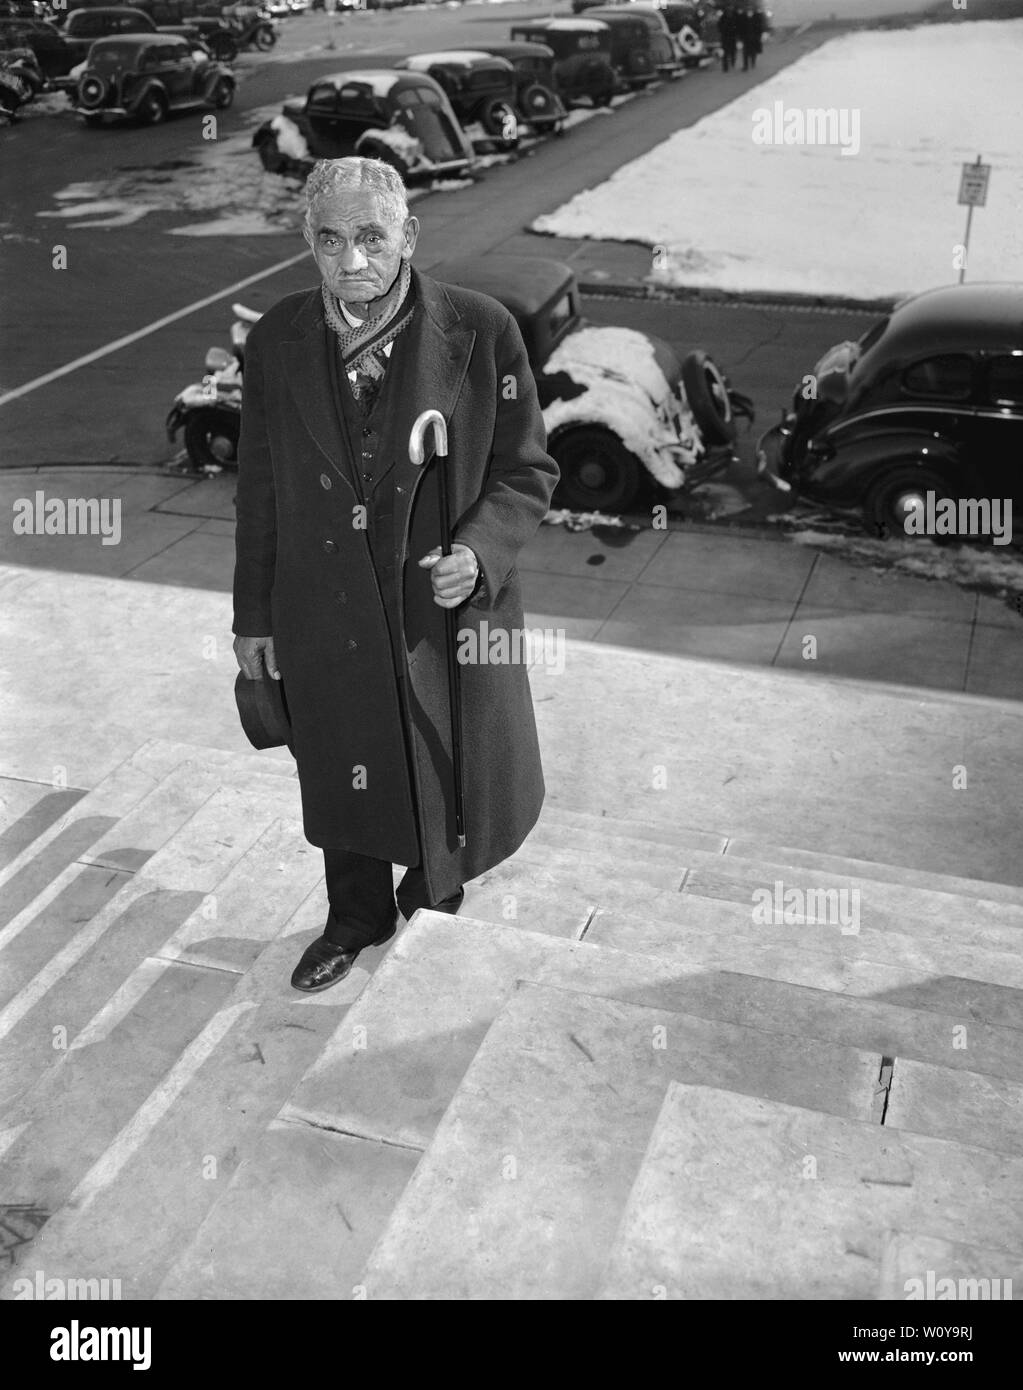 William Andrew Johnson, Former Slave to Former President Andrew Johnson, who was presented with a Silver Handled Cane by President Roosevelt, Portrait on Steps of U.S. Capitol during visit to Washington DC. USA, Harris & Ewing, 1937 Stock Photo